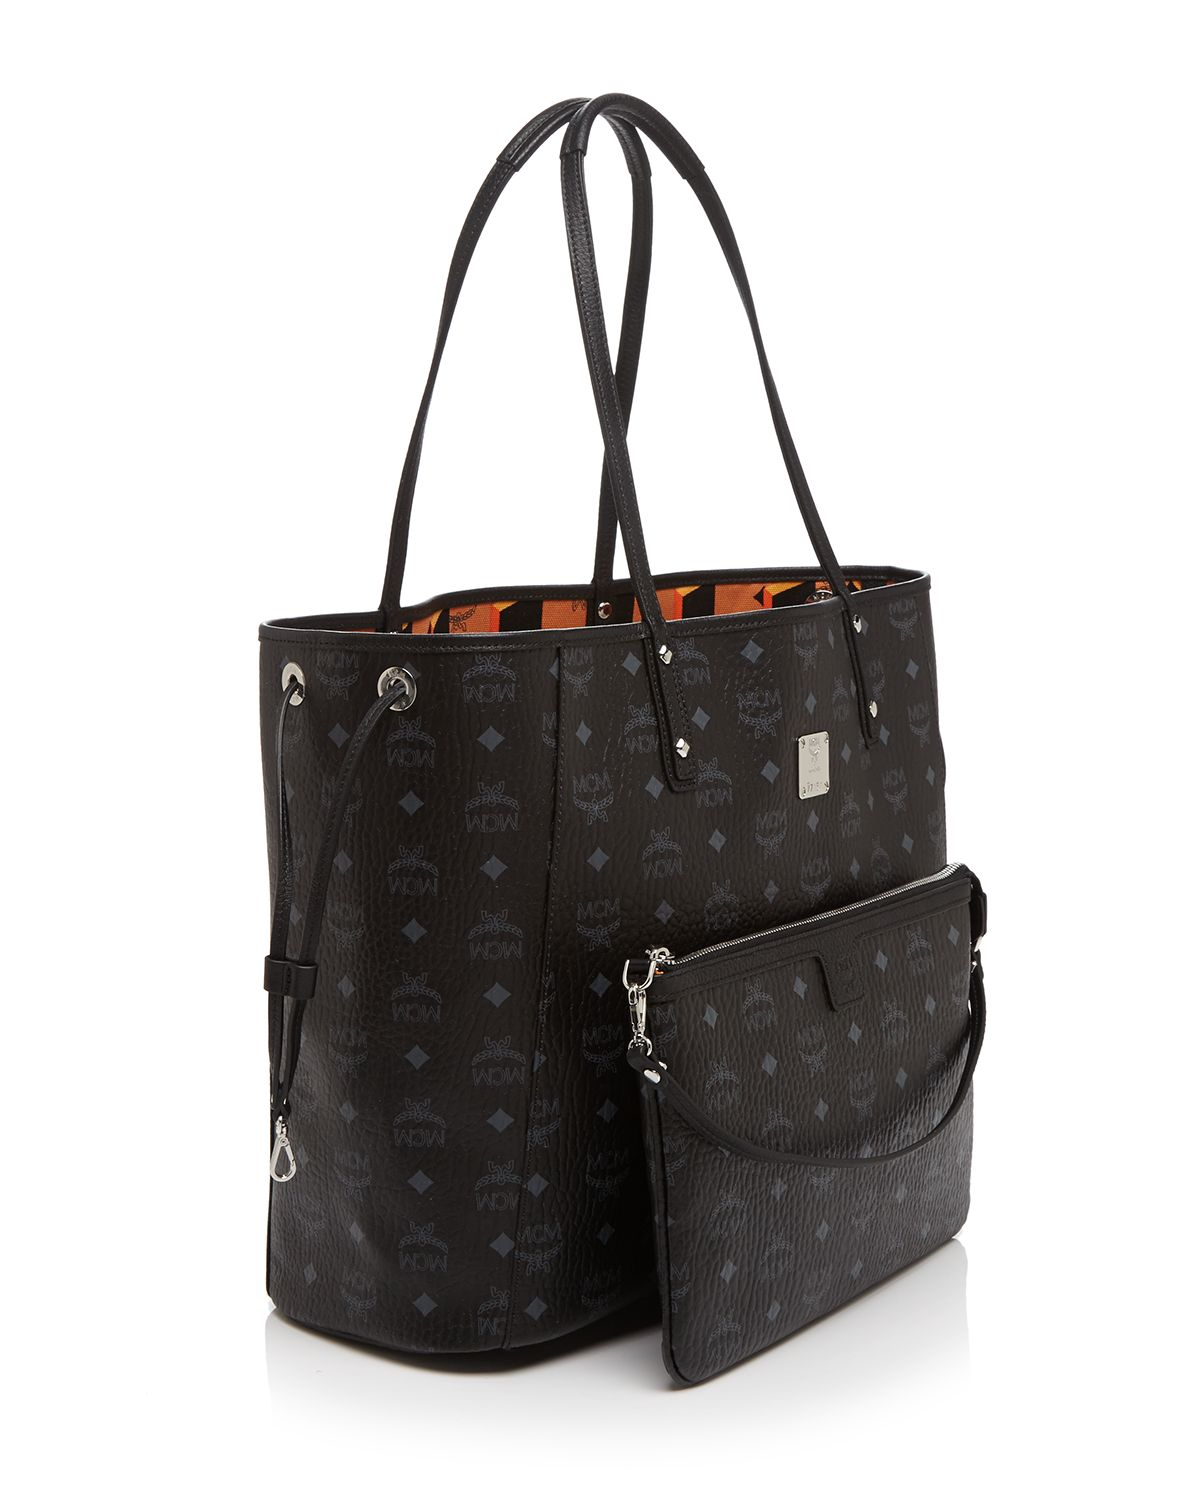 MCM Shopper Project Visetos Reversible Large Tote in Black - Lyst